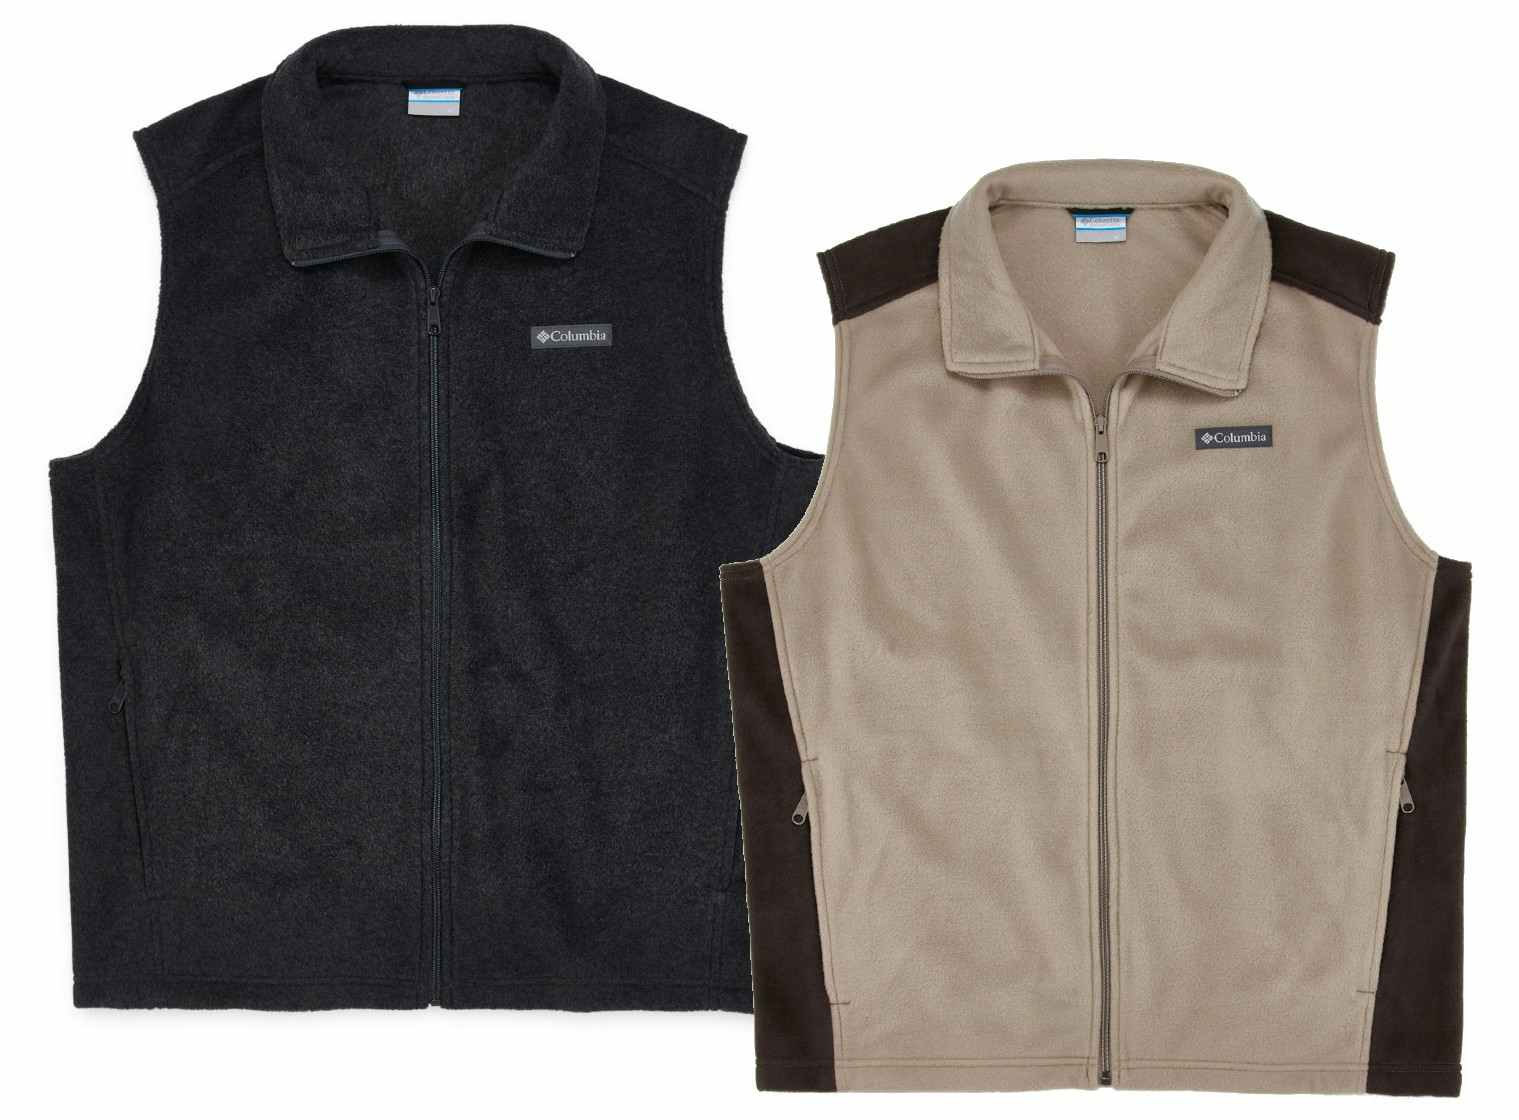 jcpenney-columbia-vest-2022-2